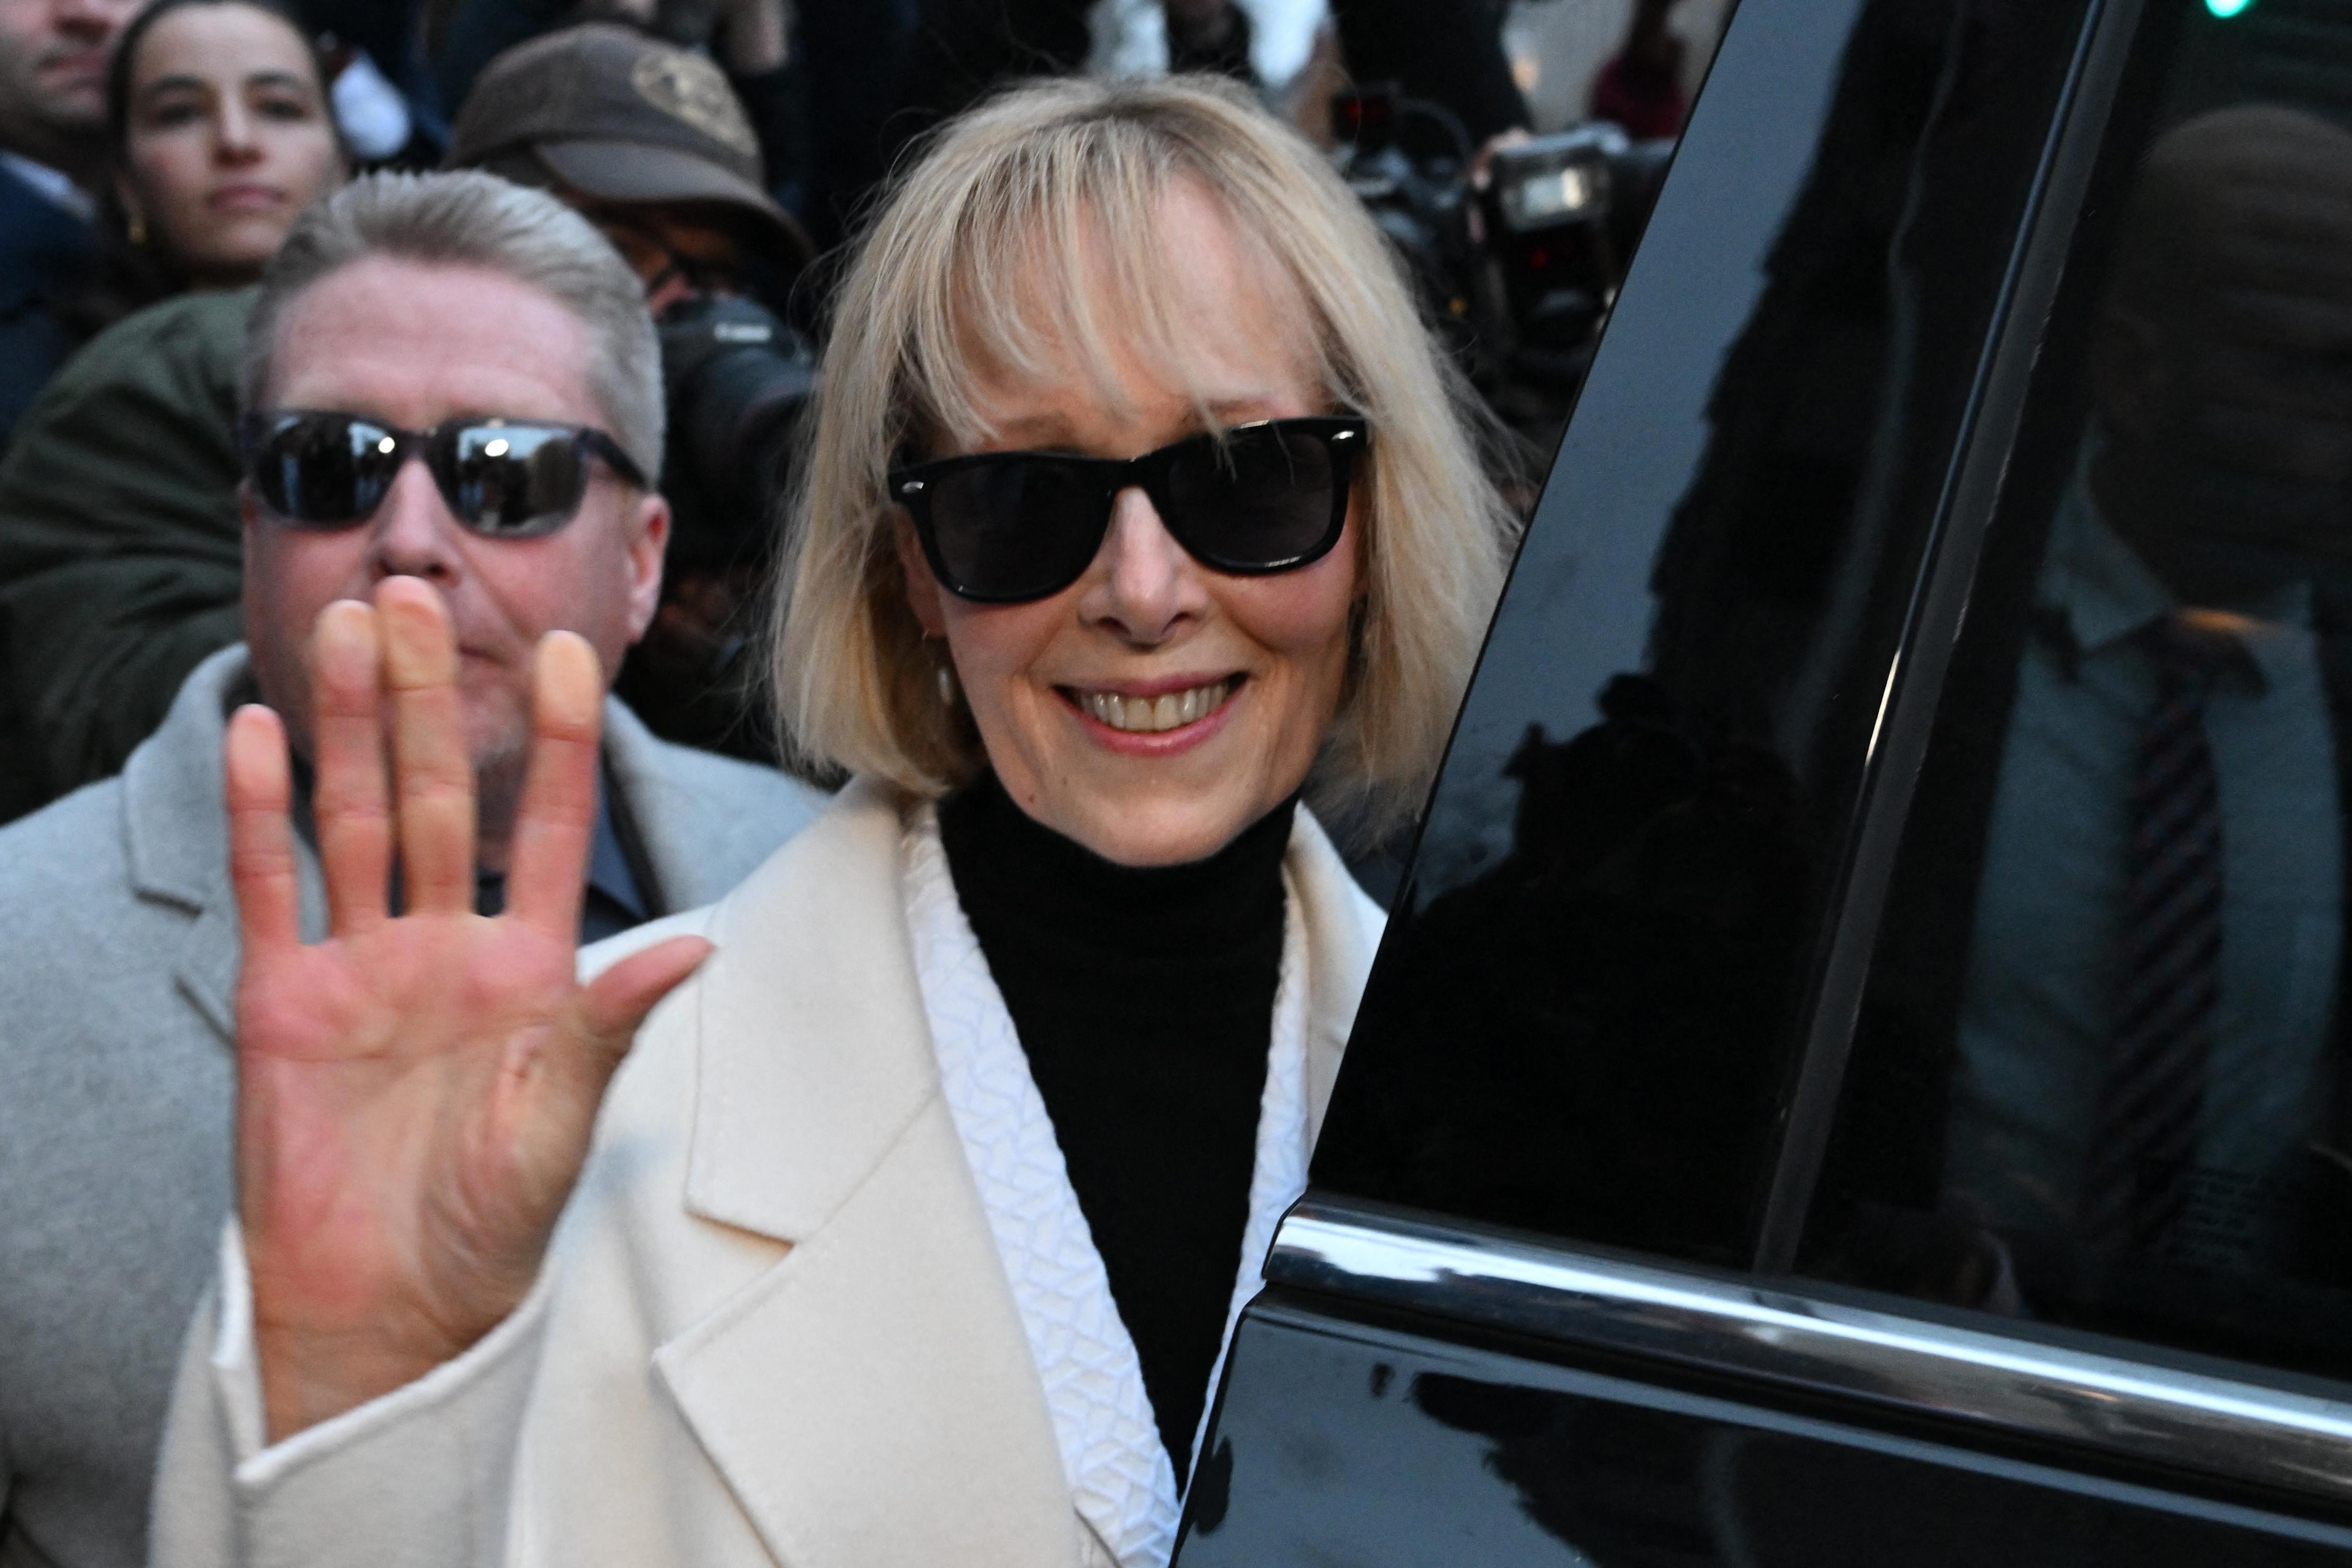 Writer E. Jean Carroll waves as she leaves federal court, as she enters her SUV. She is smiling and wearing sunglasses.